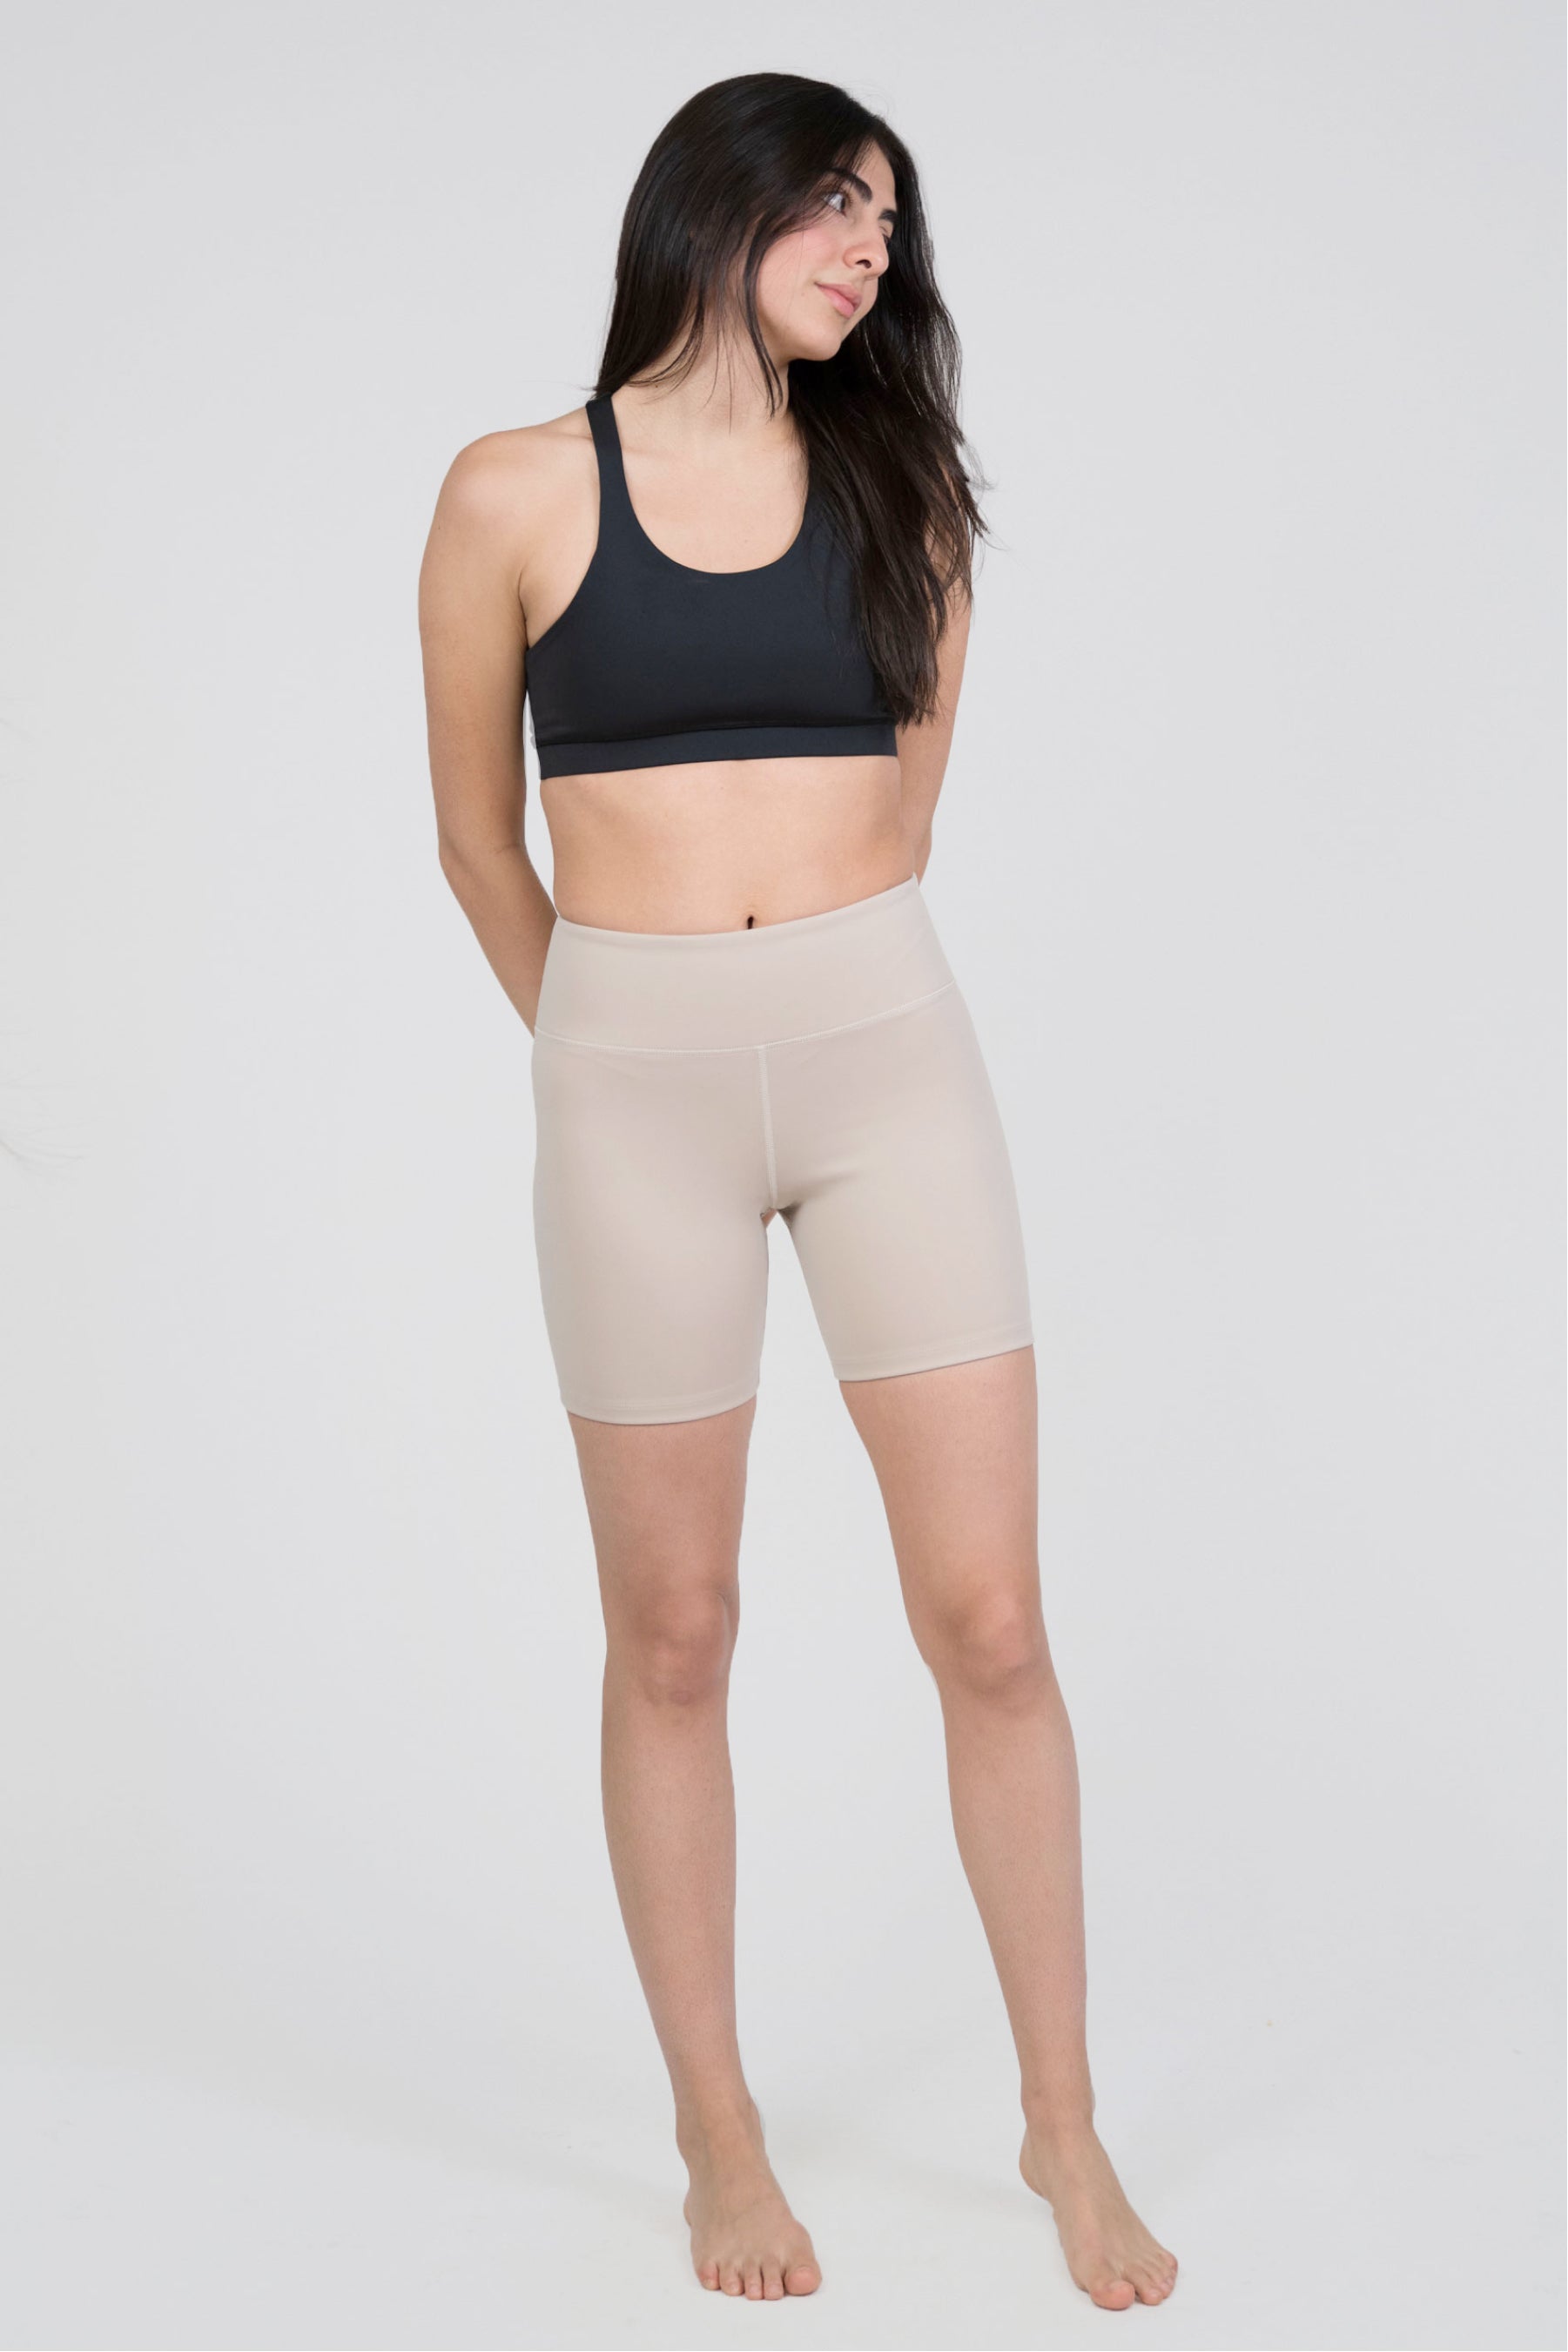 SPANX Women's Look at me Now Seamless 100% Cotton Bike Shorts